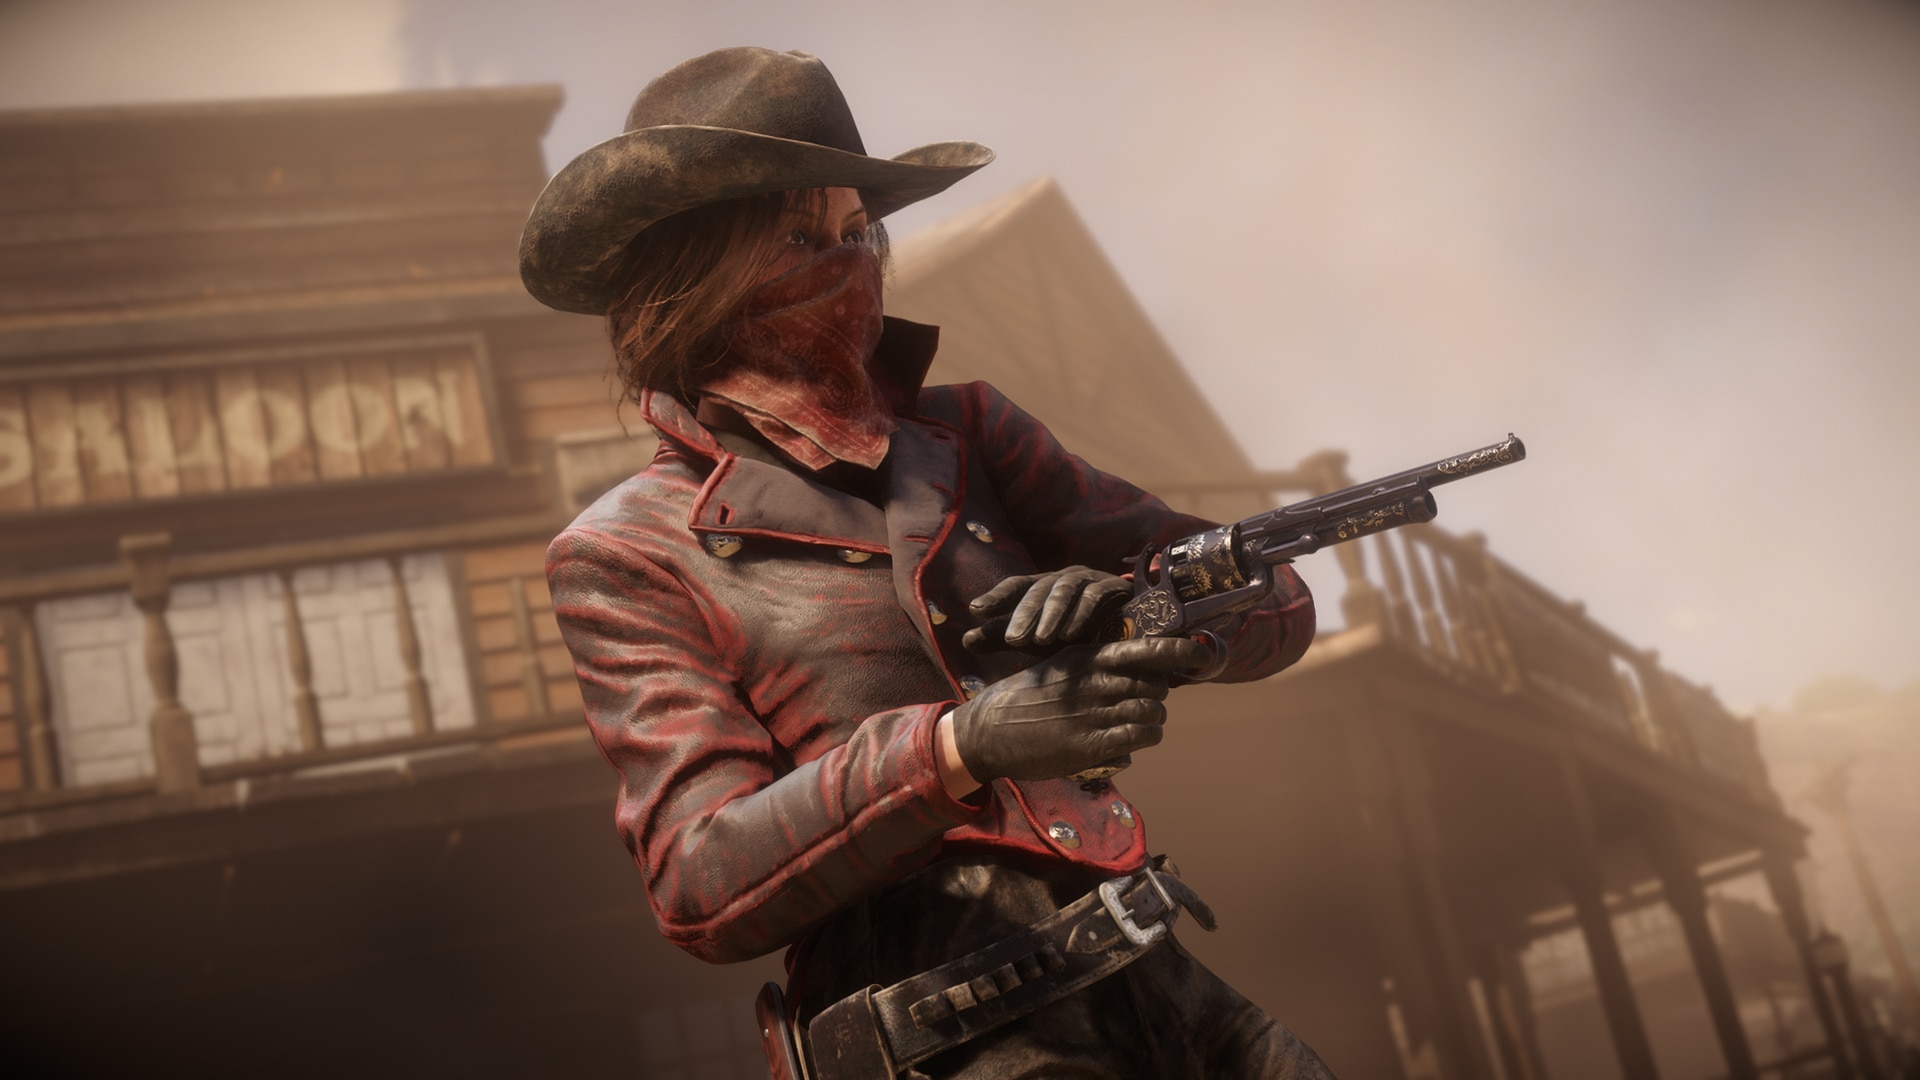 Red Redemption 2 is Available to on the Epic Games Store